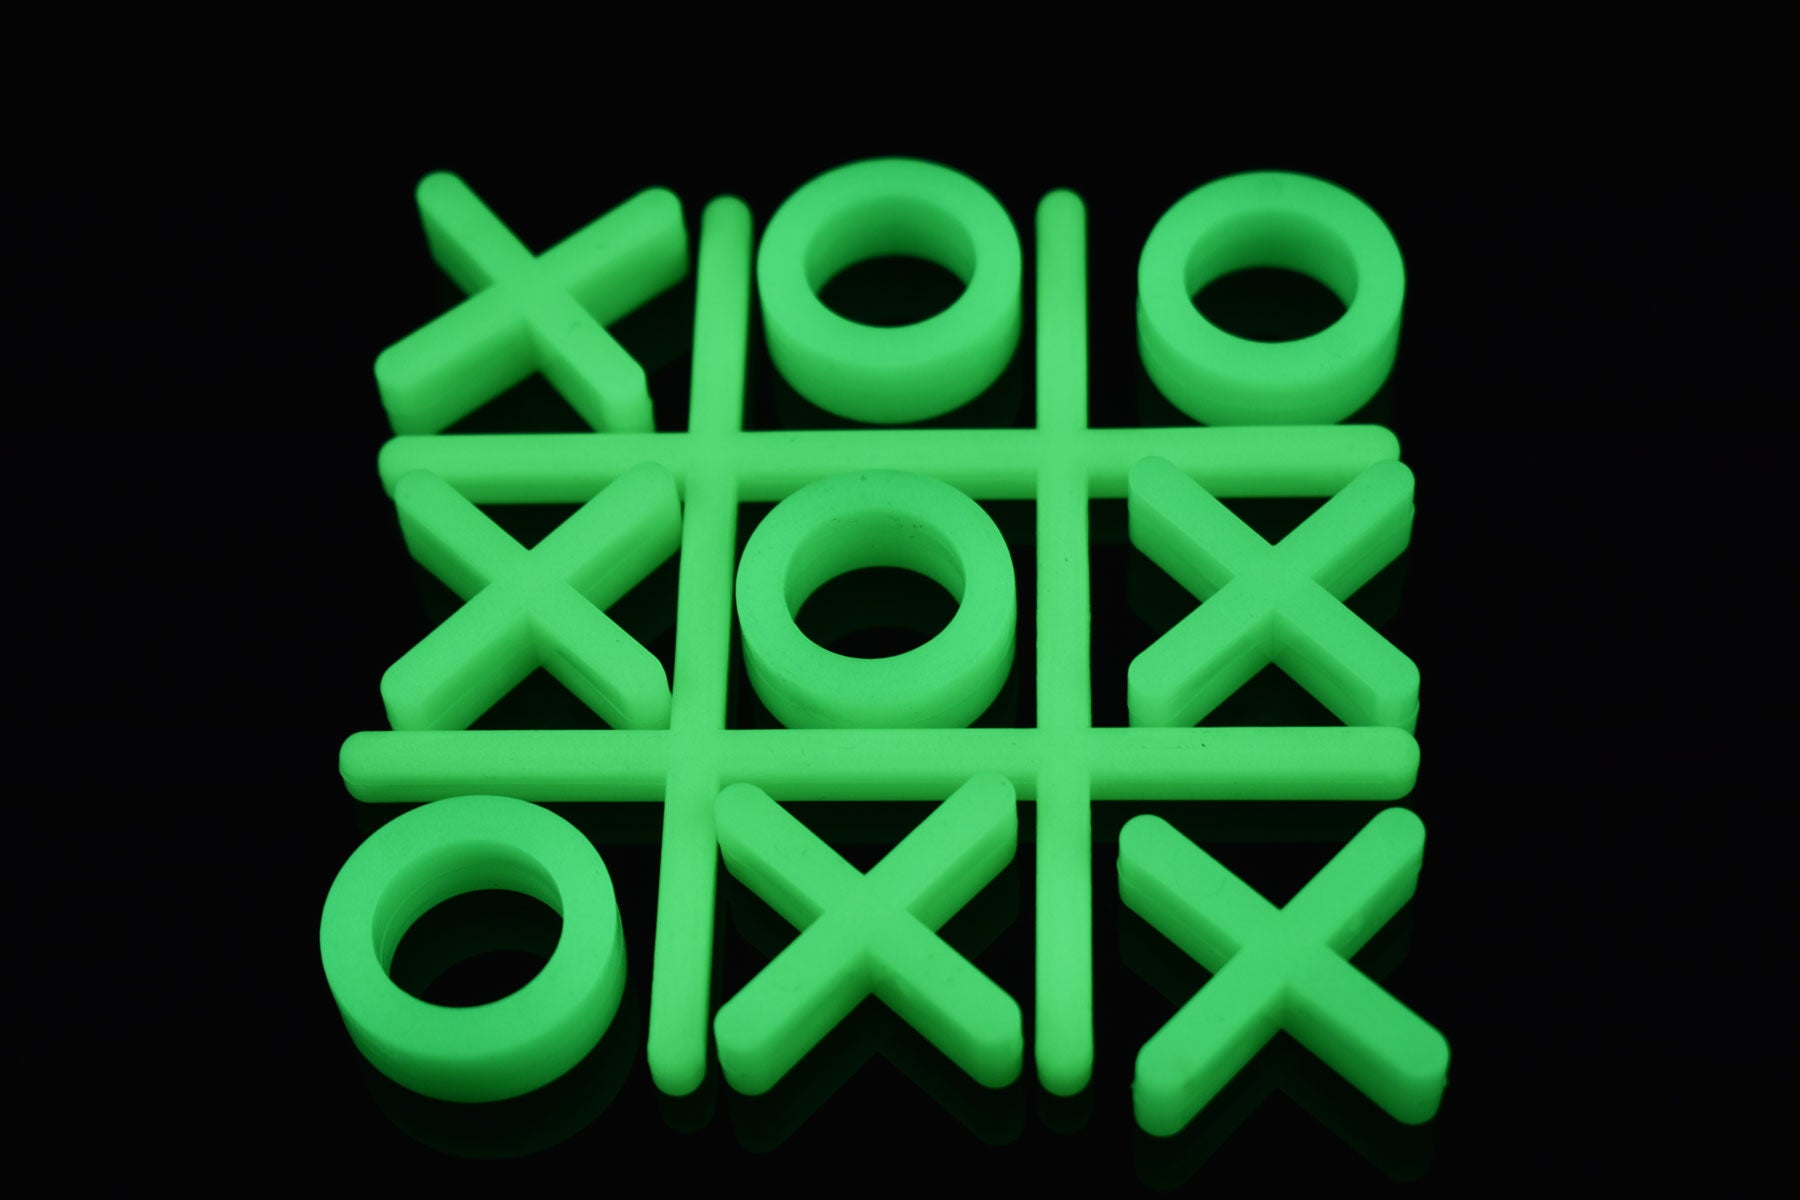 Addition Tic Tac Toe  Glow Day Games for Addition Within 10